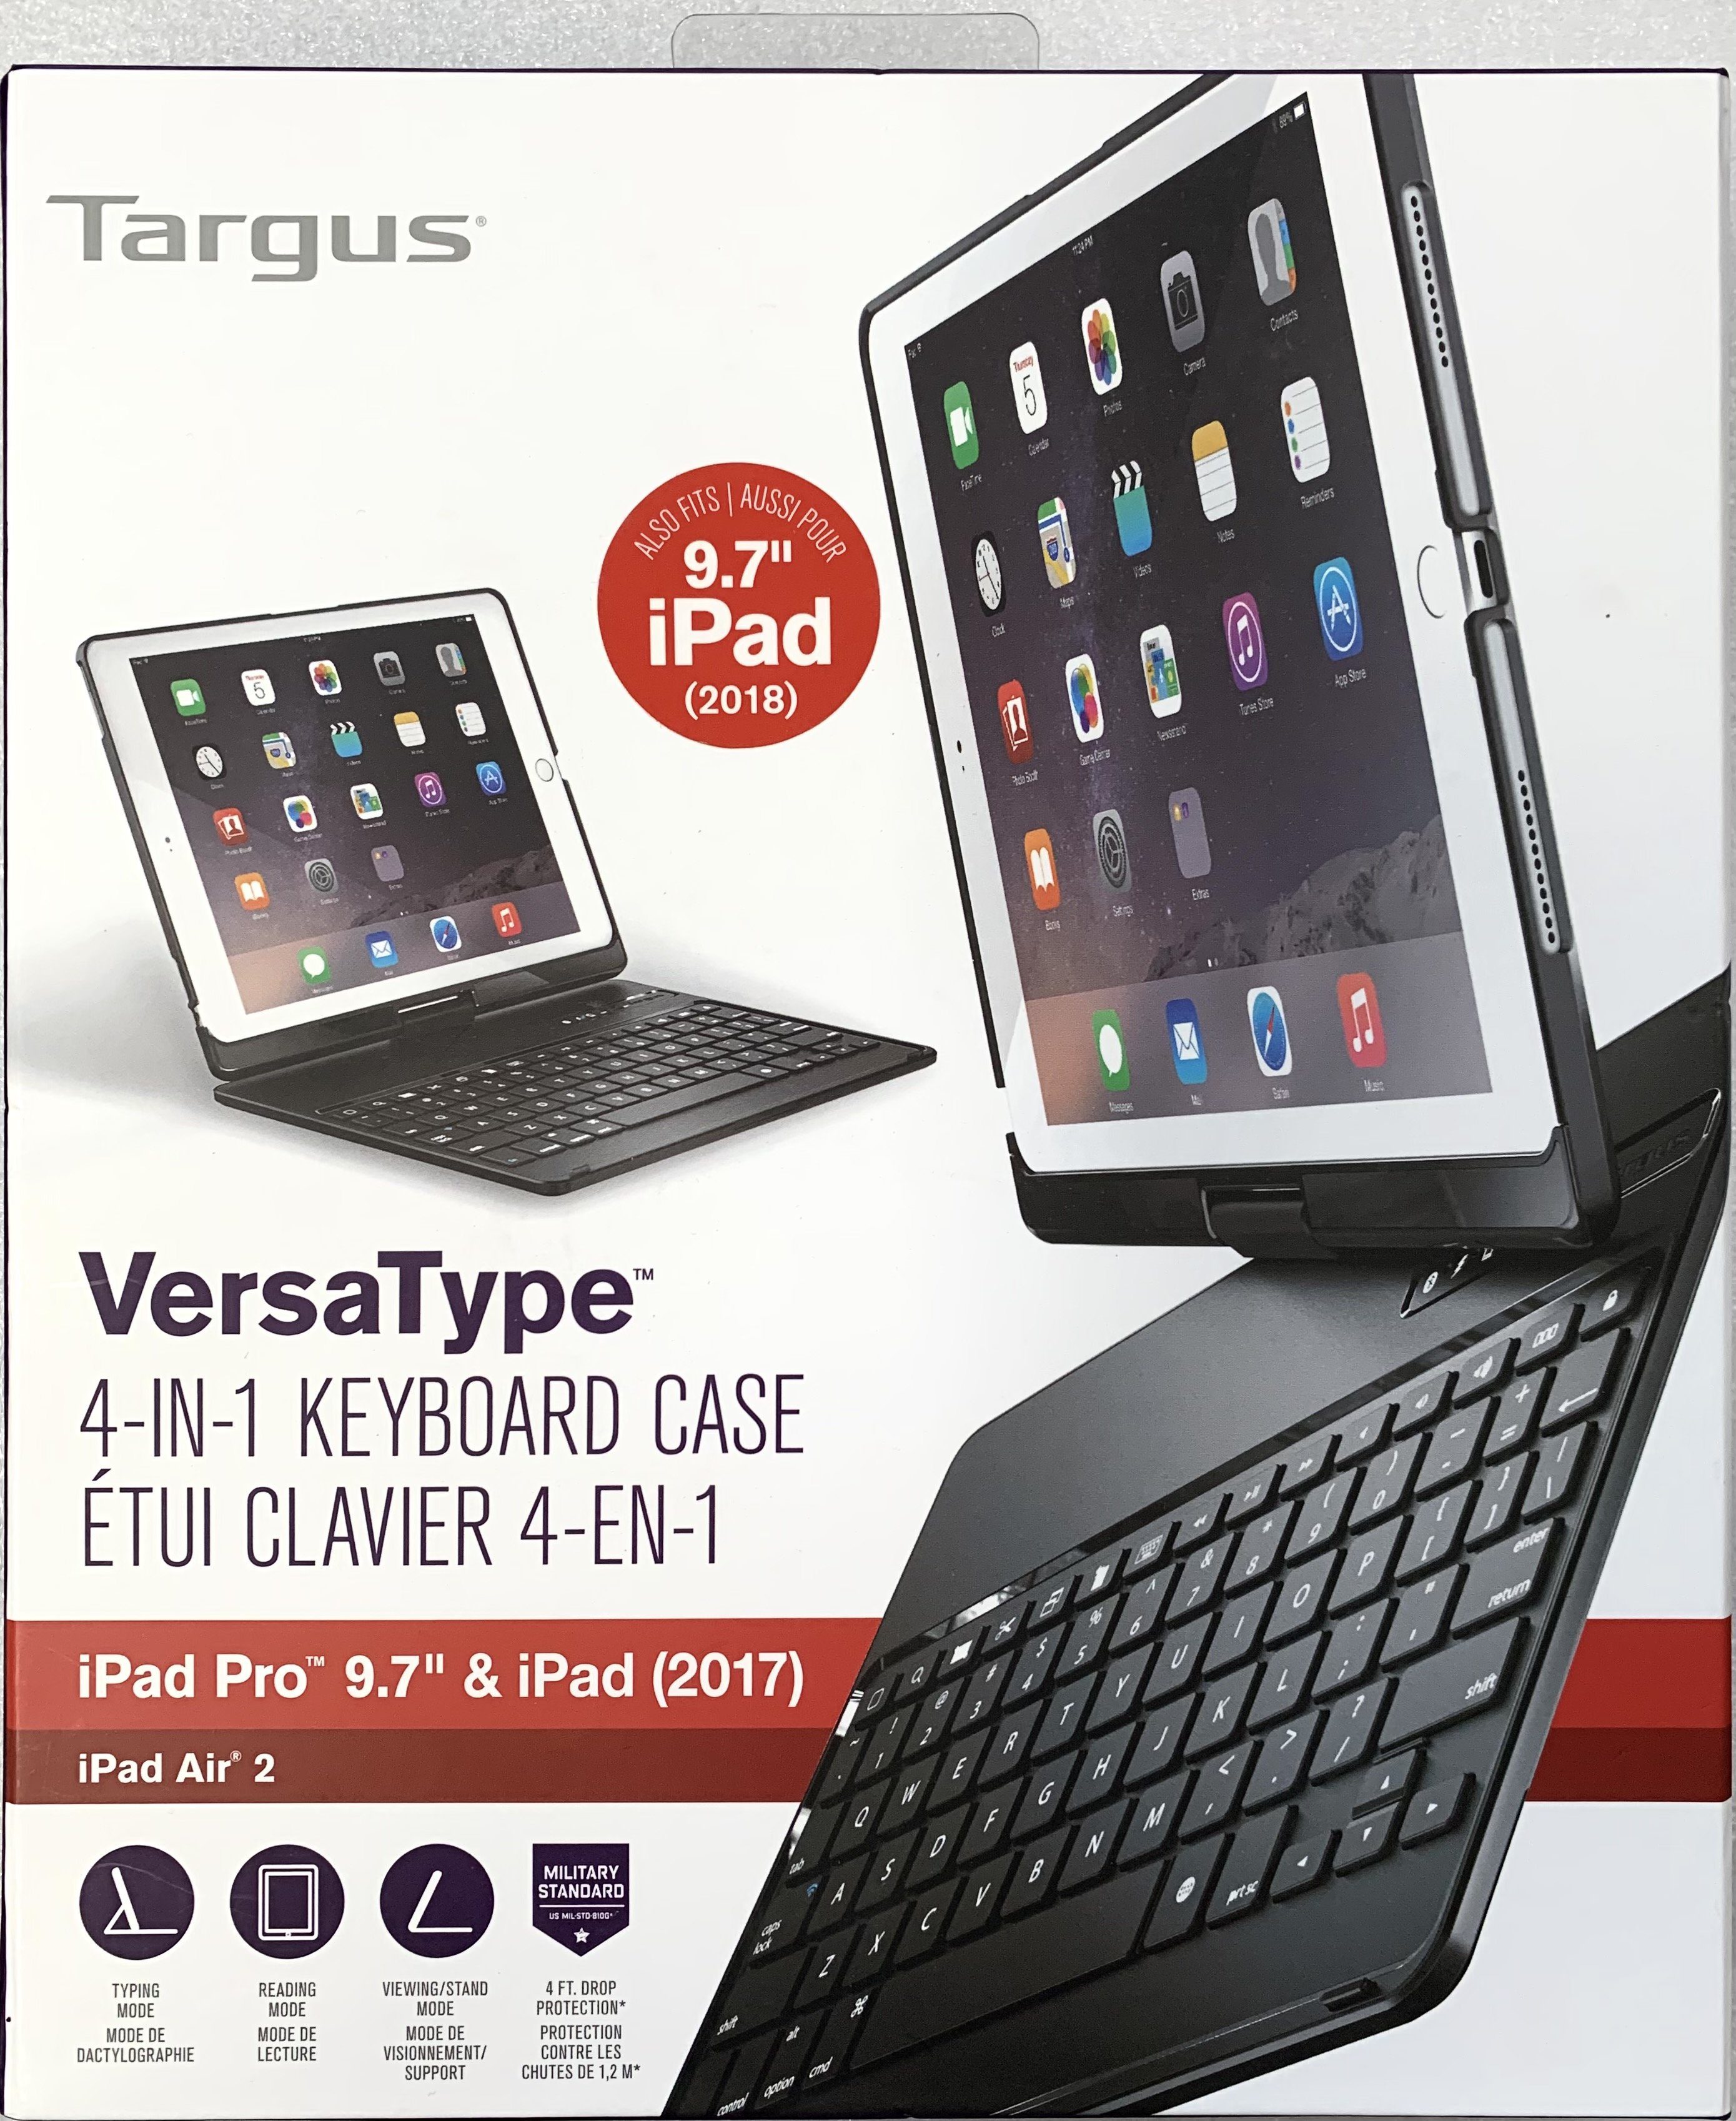 Targus VersaType 4-in-1 Keyboard Case with Power Bank for iPad Pro 9.7” & iPad Air 2 2017 (Black) (THZ620CA)